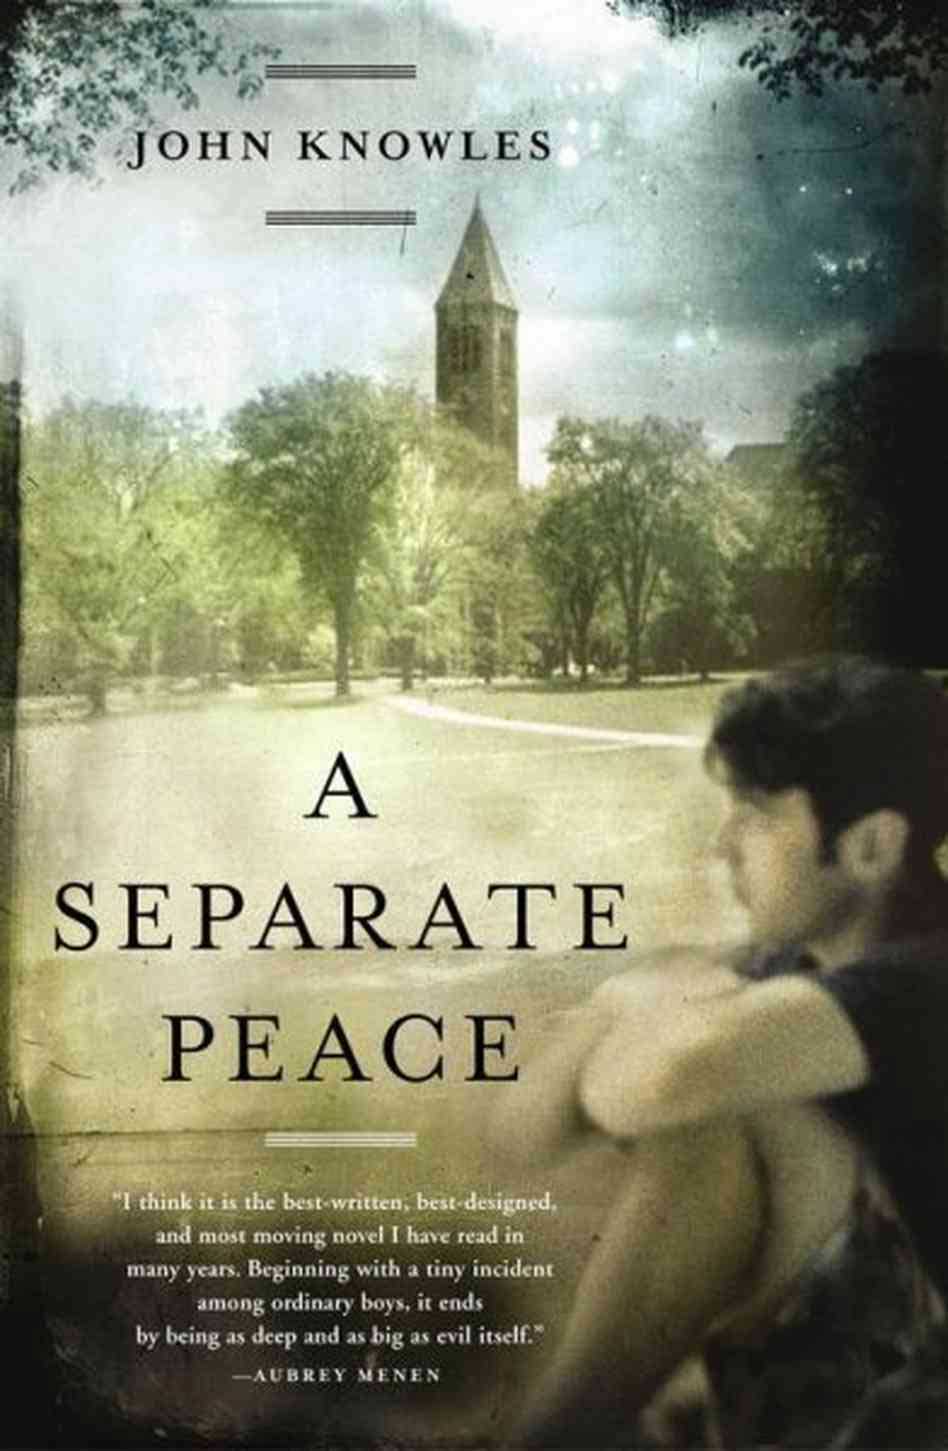 A Separate Peace, by John Knowles.
                              
                              
                              
                              Competition between two friends at an elite prep school reaches a climax when one of them impulsively shakes a tree branch the other is standing on and knocks him off, changing both of their lives forever.
                              
                              
                              
                              Buy now: A Separate Peace